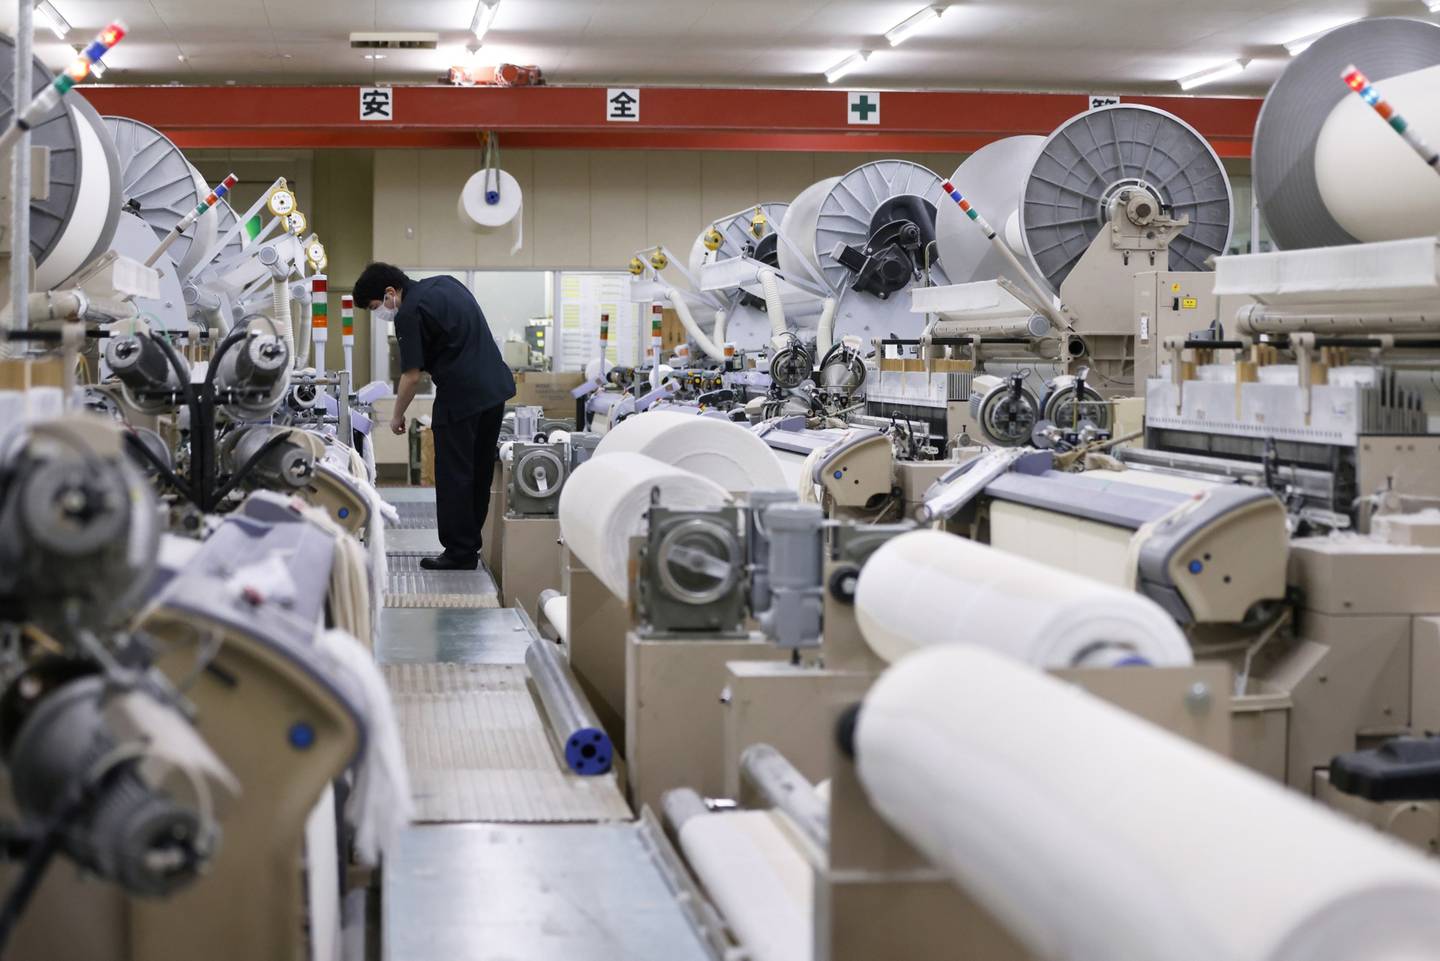 An employee monitors a weaving machine during towel production at Hotman Co.'s factory in Ome, Tokyo Metropolis, Japan, on Tuesday, May 10, 2022. Japan is scheduled to release its first-quarter gross domestic product (GDP) figures on May 17. Photographer: Kiyoshi Ota/Bloomberg